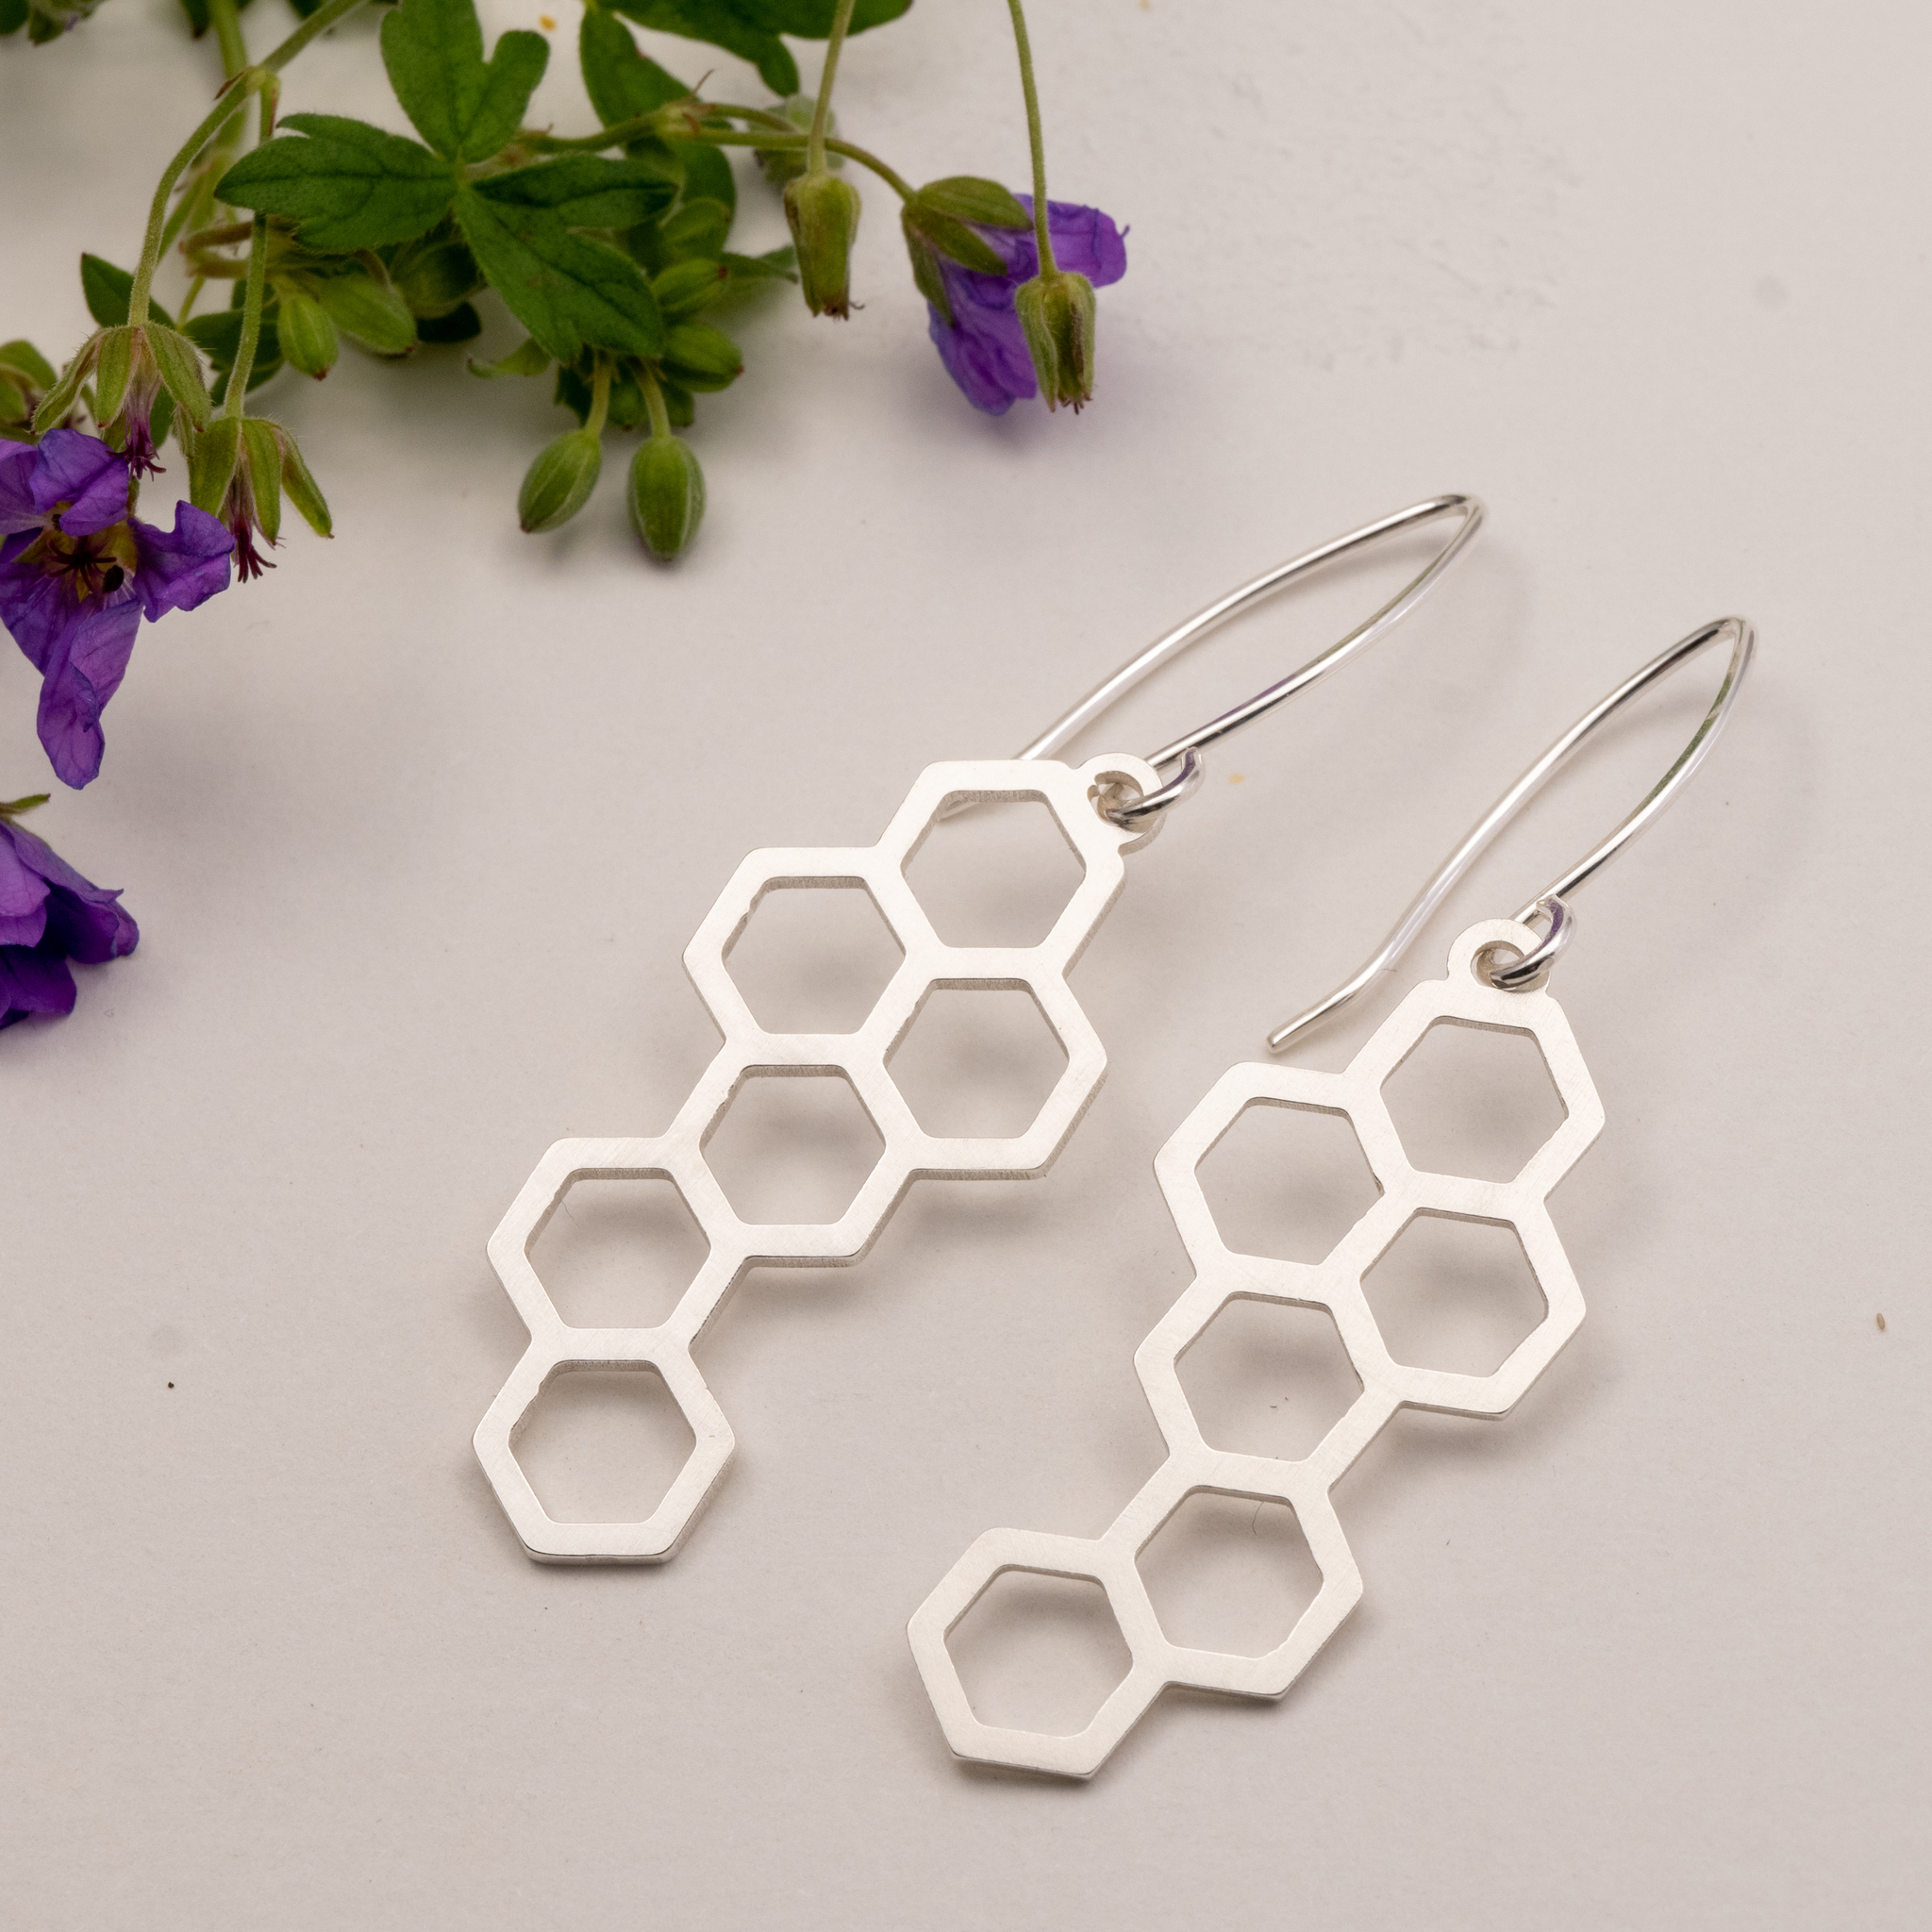 Honey Statement Earrings Recycled Silver